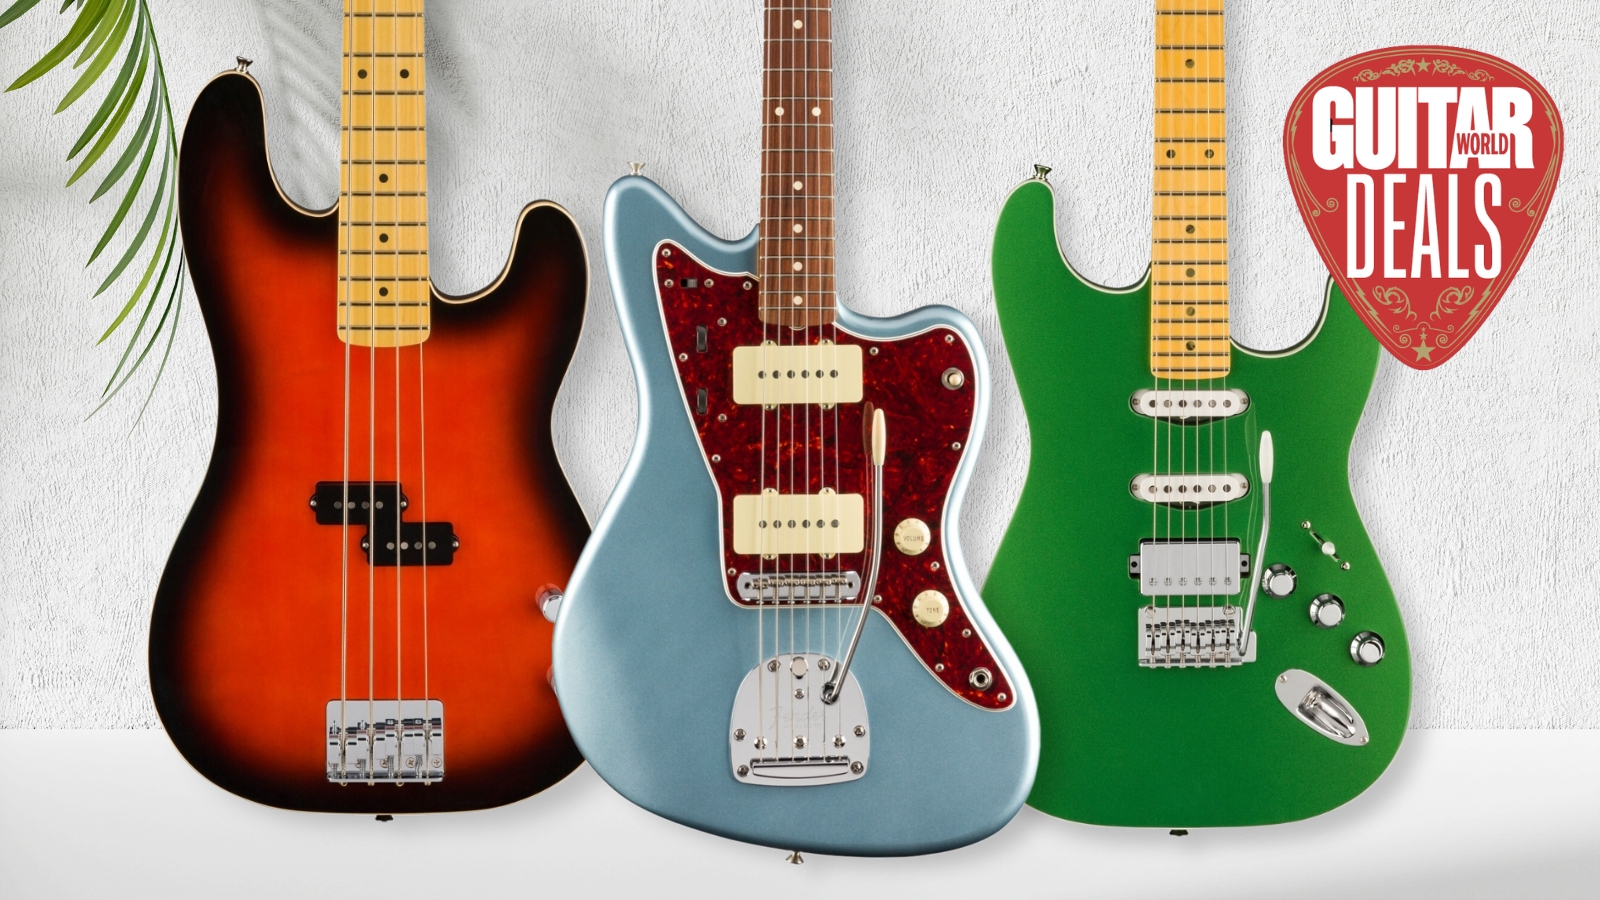 Forget Amazon, Fender’s official shop is the place to shop today – get up to $350 off electric guitars and basses